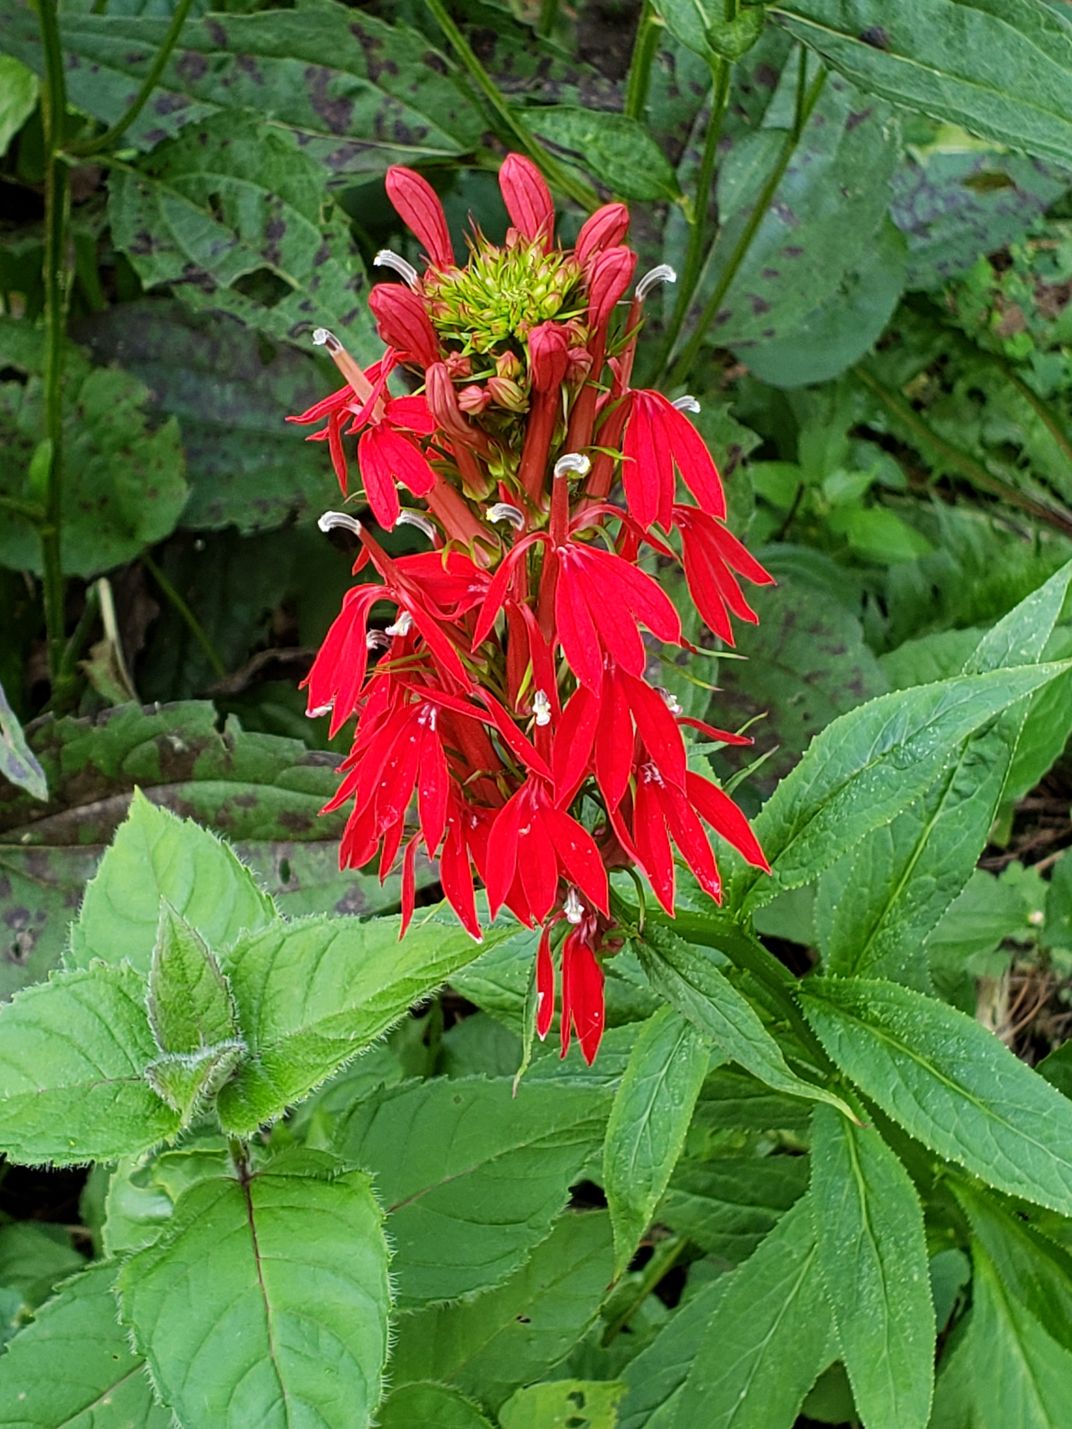 Can Deer Consume Cardinal Flowers? - Birds Of The Wild